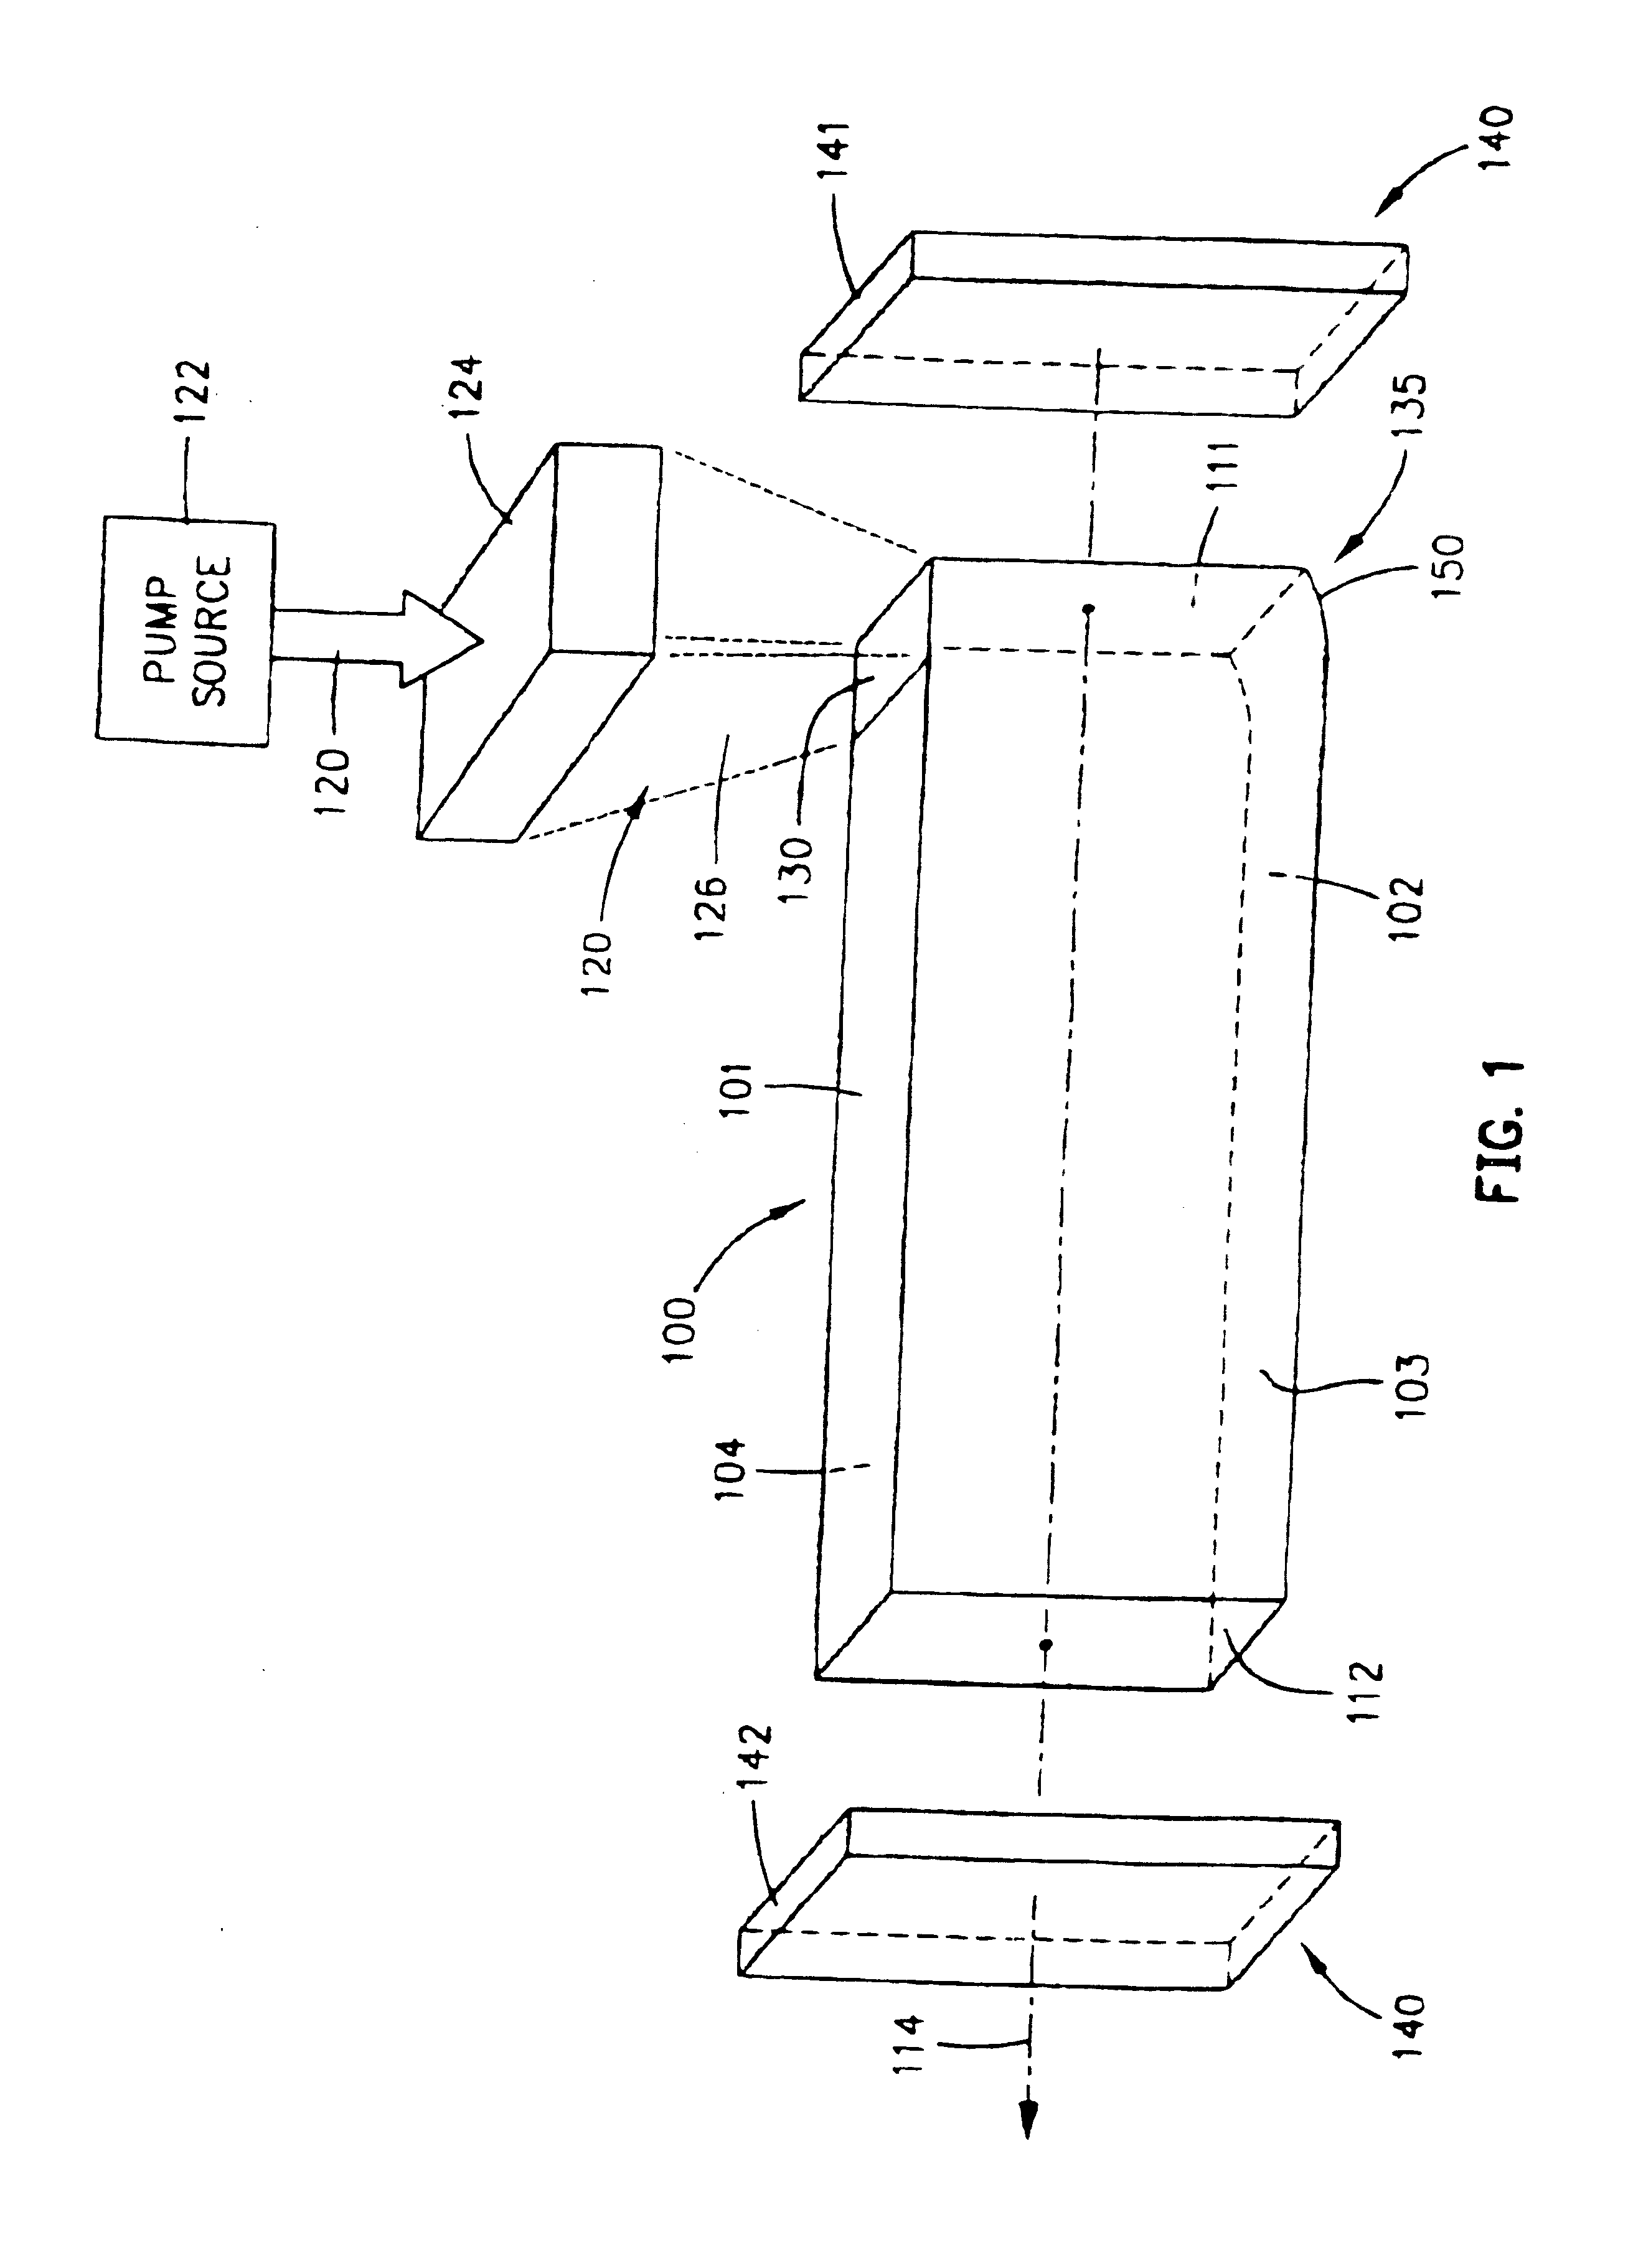 Laser with gain medium configured to provide an integrated optical pump cavity